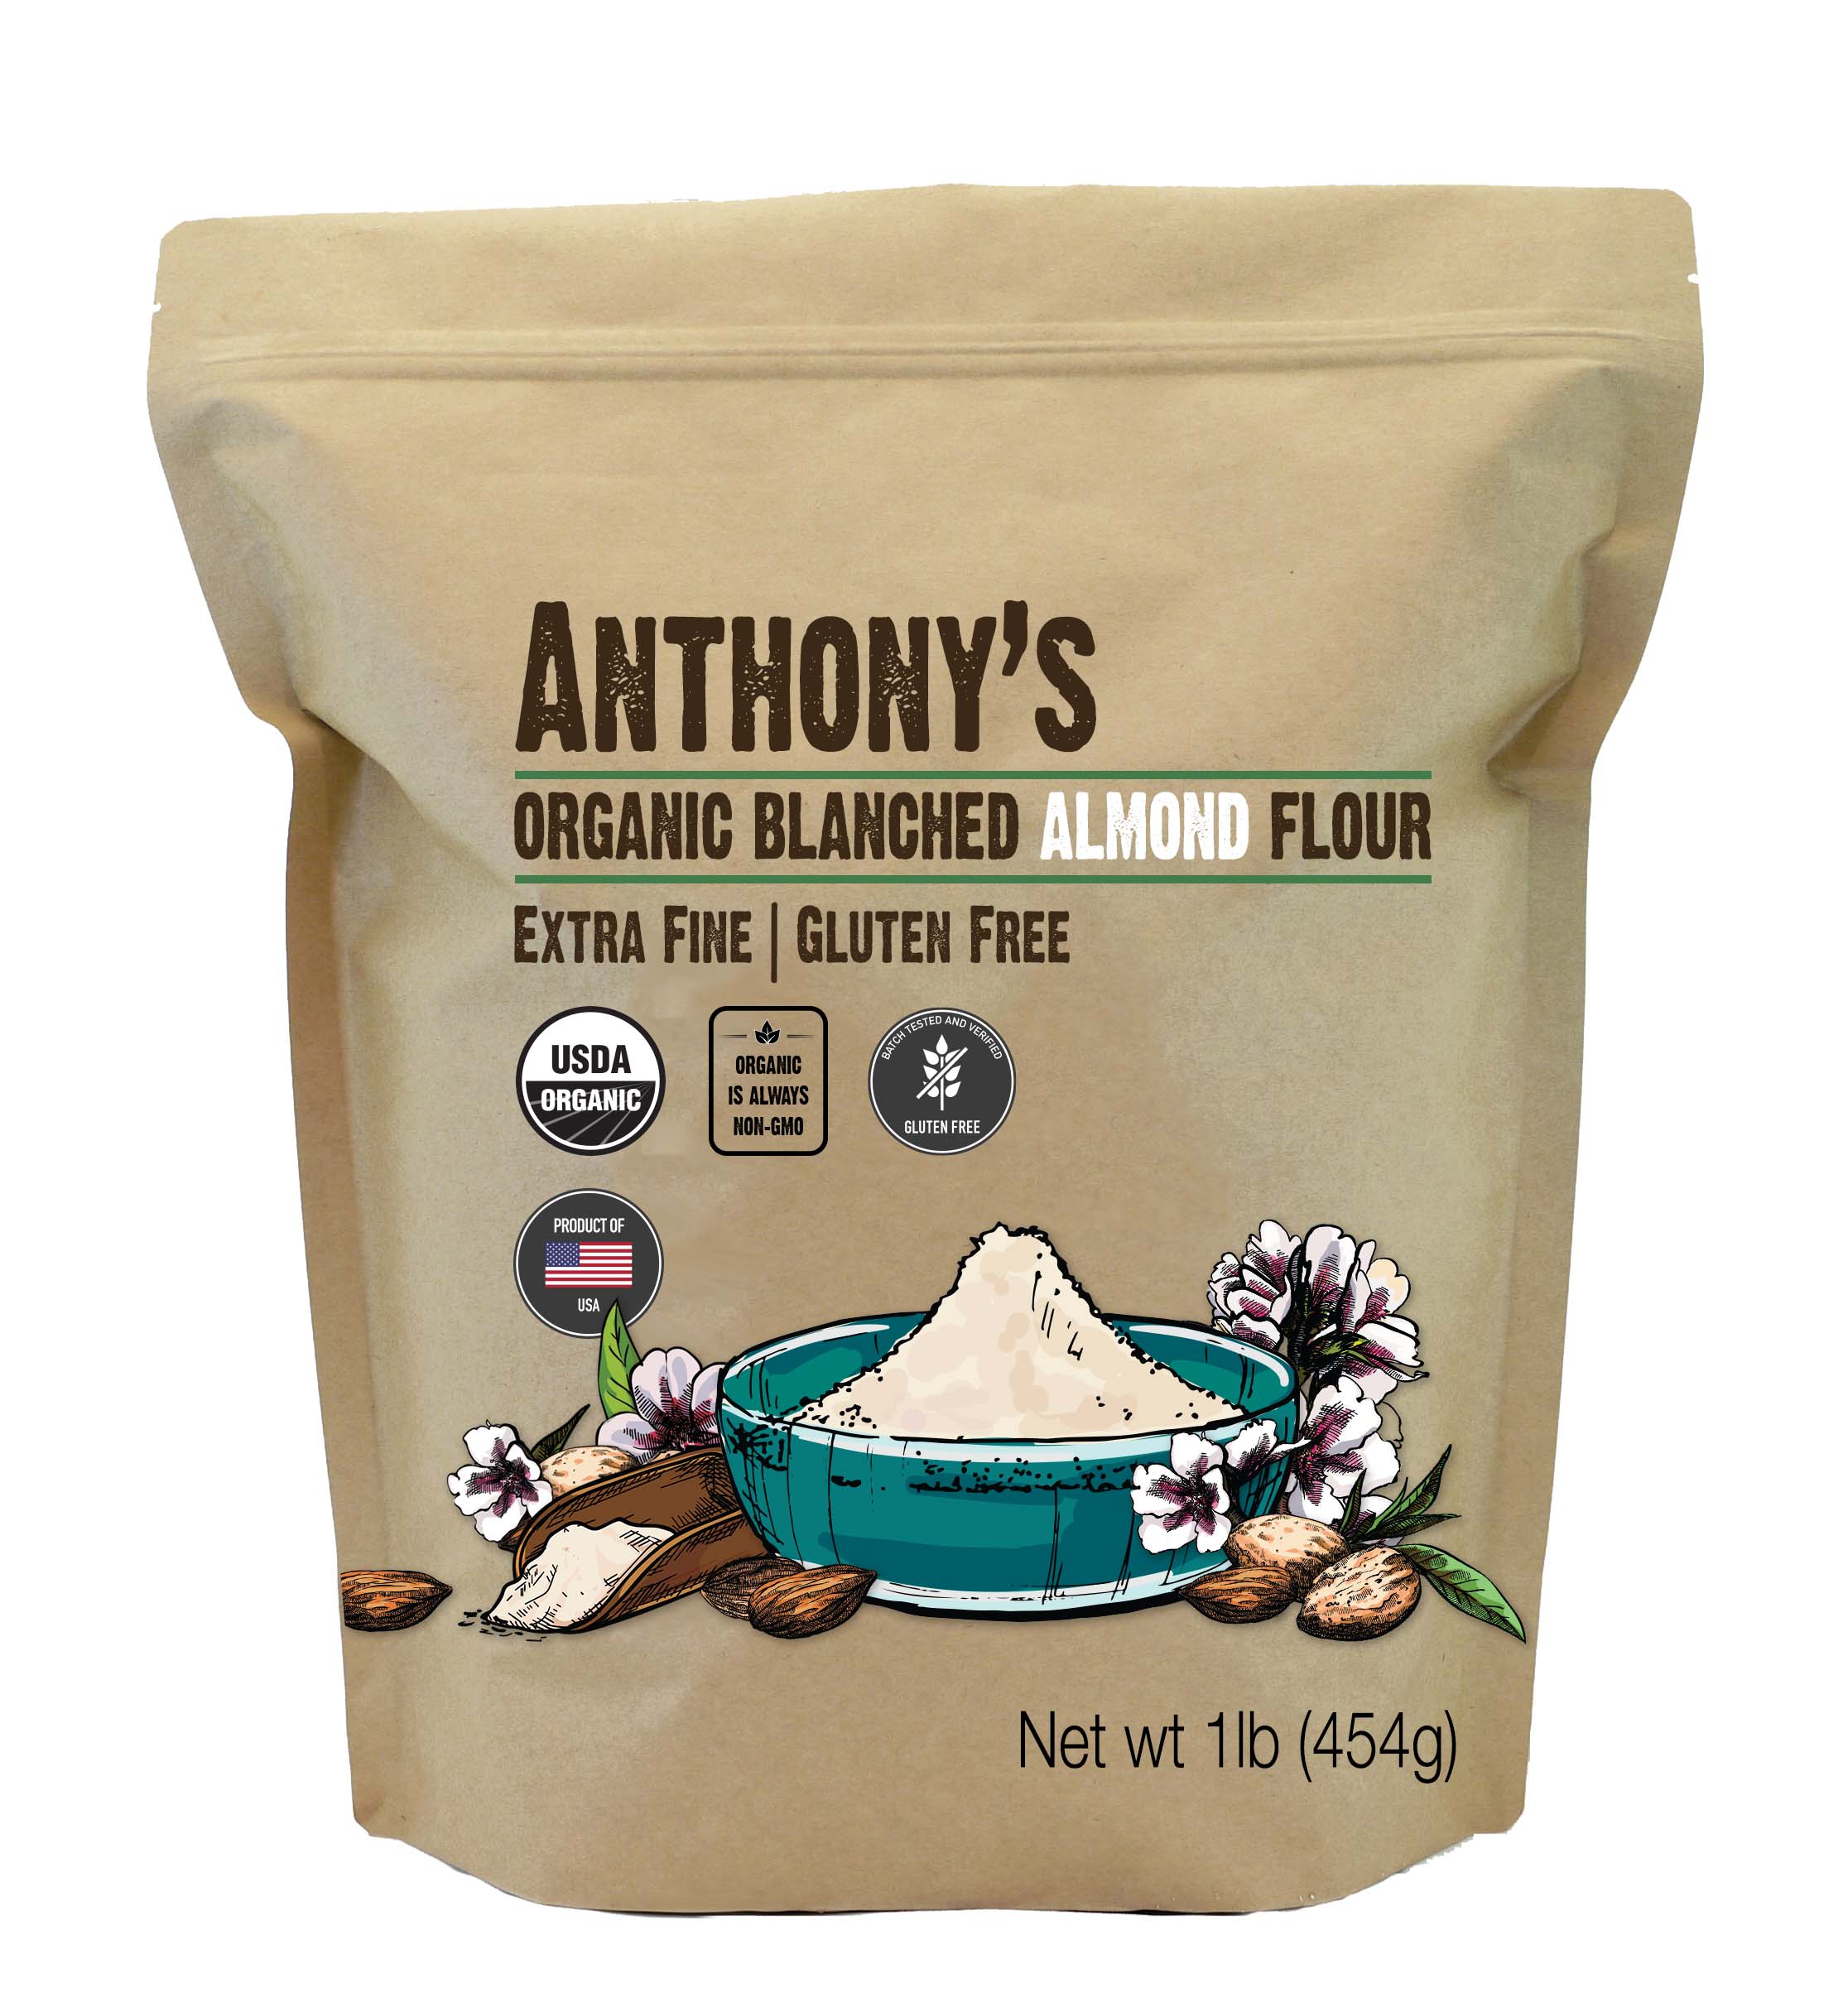 Organic Almond Flour: Blanched & Certified Gluten-Free